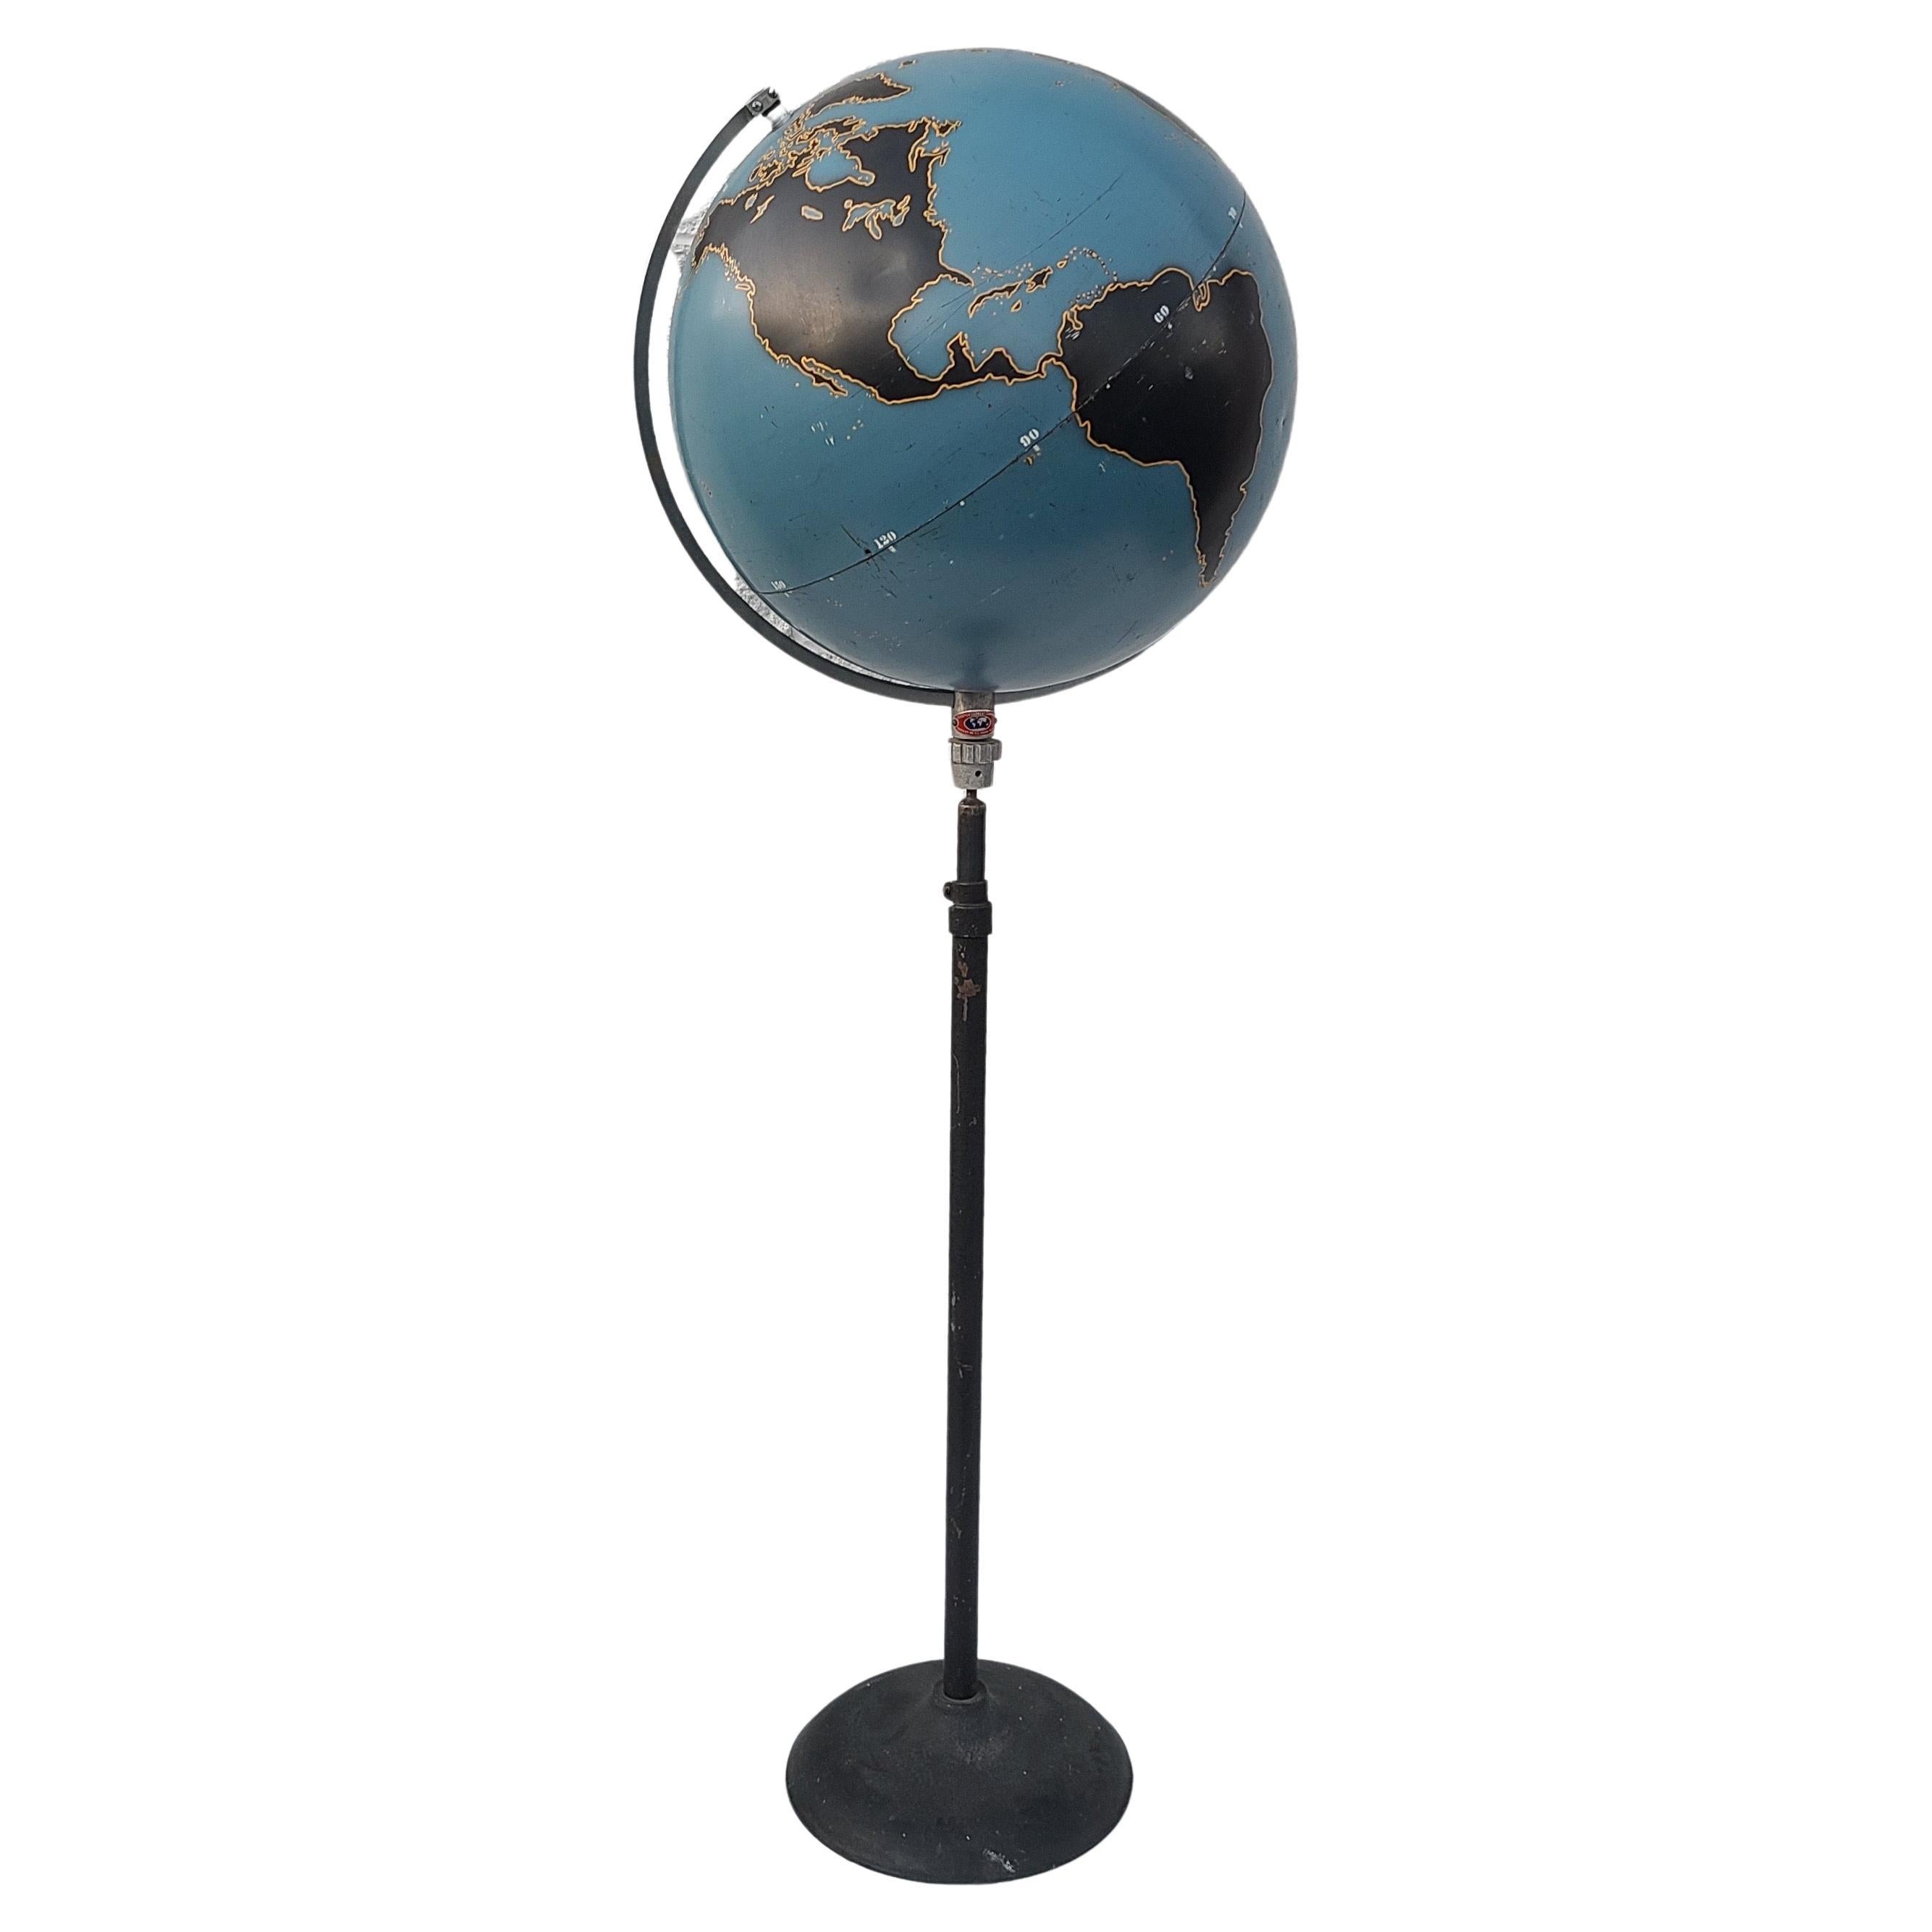 Please message us for a cost effective shipping quote to your location.

Aviator Floor Globe by Denoyer-Geppert. Black continents and open oceans for use in training. This globe has a depression in North America.